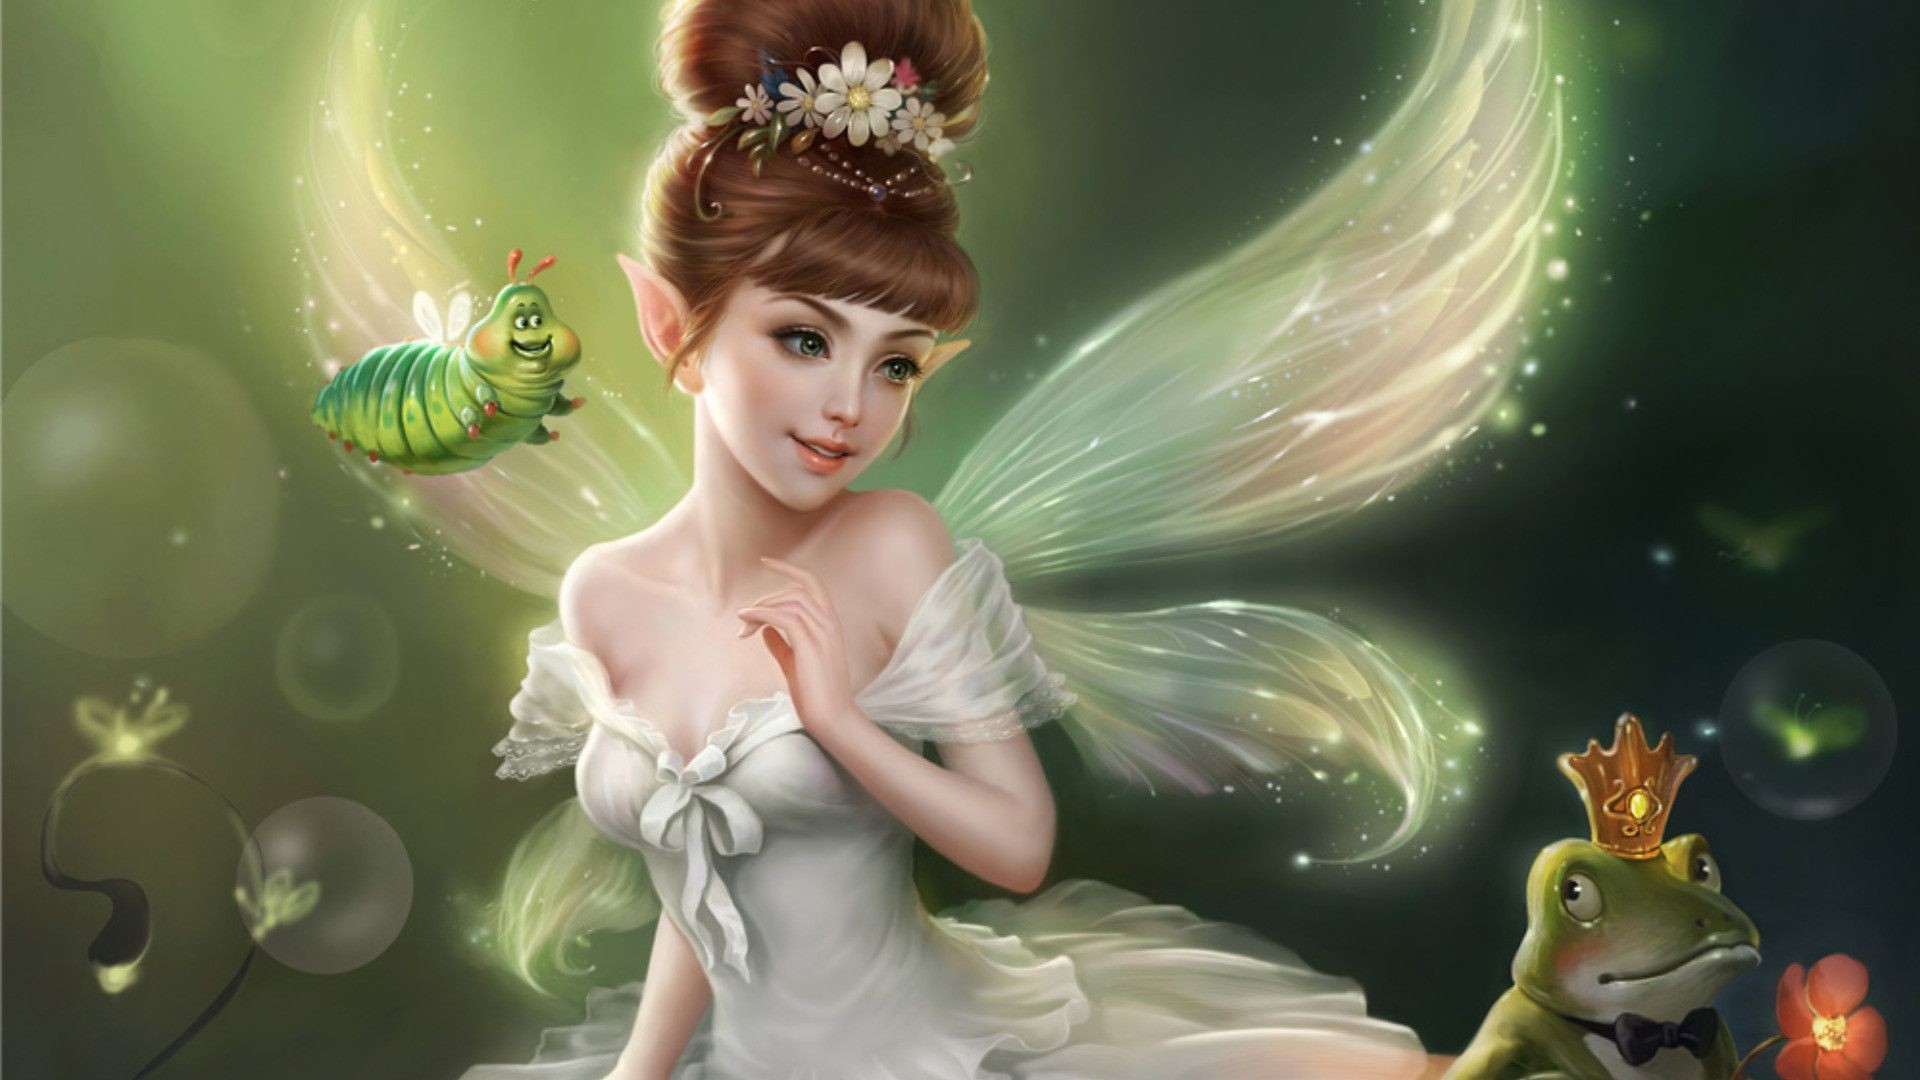 1920x1080 Collection of Animated Fairy Wallpaper on HDWallpapers